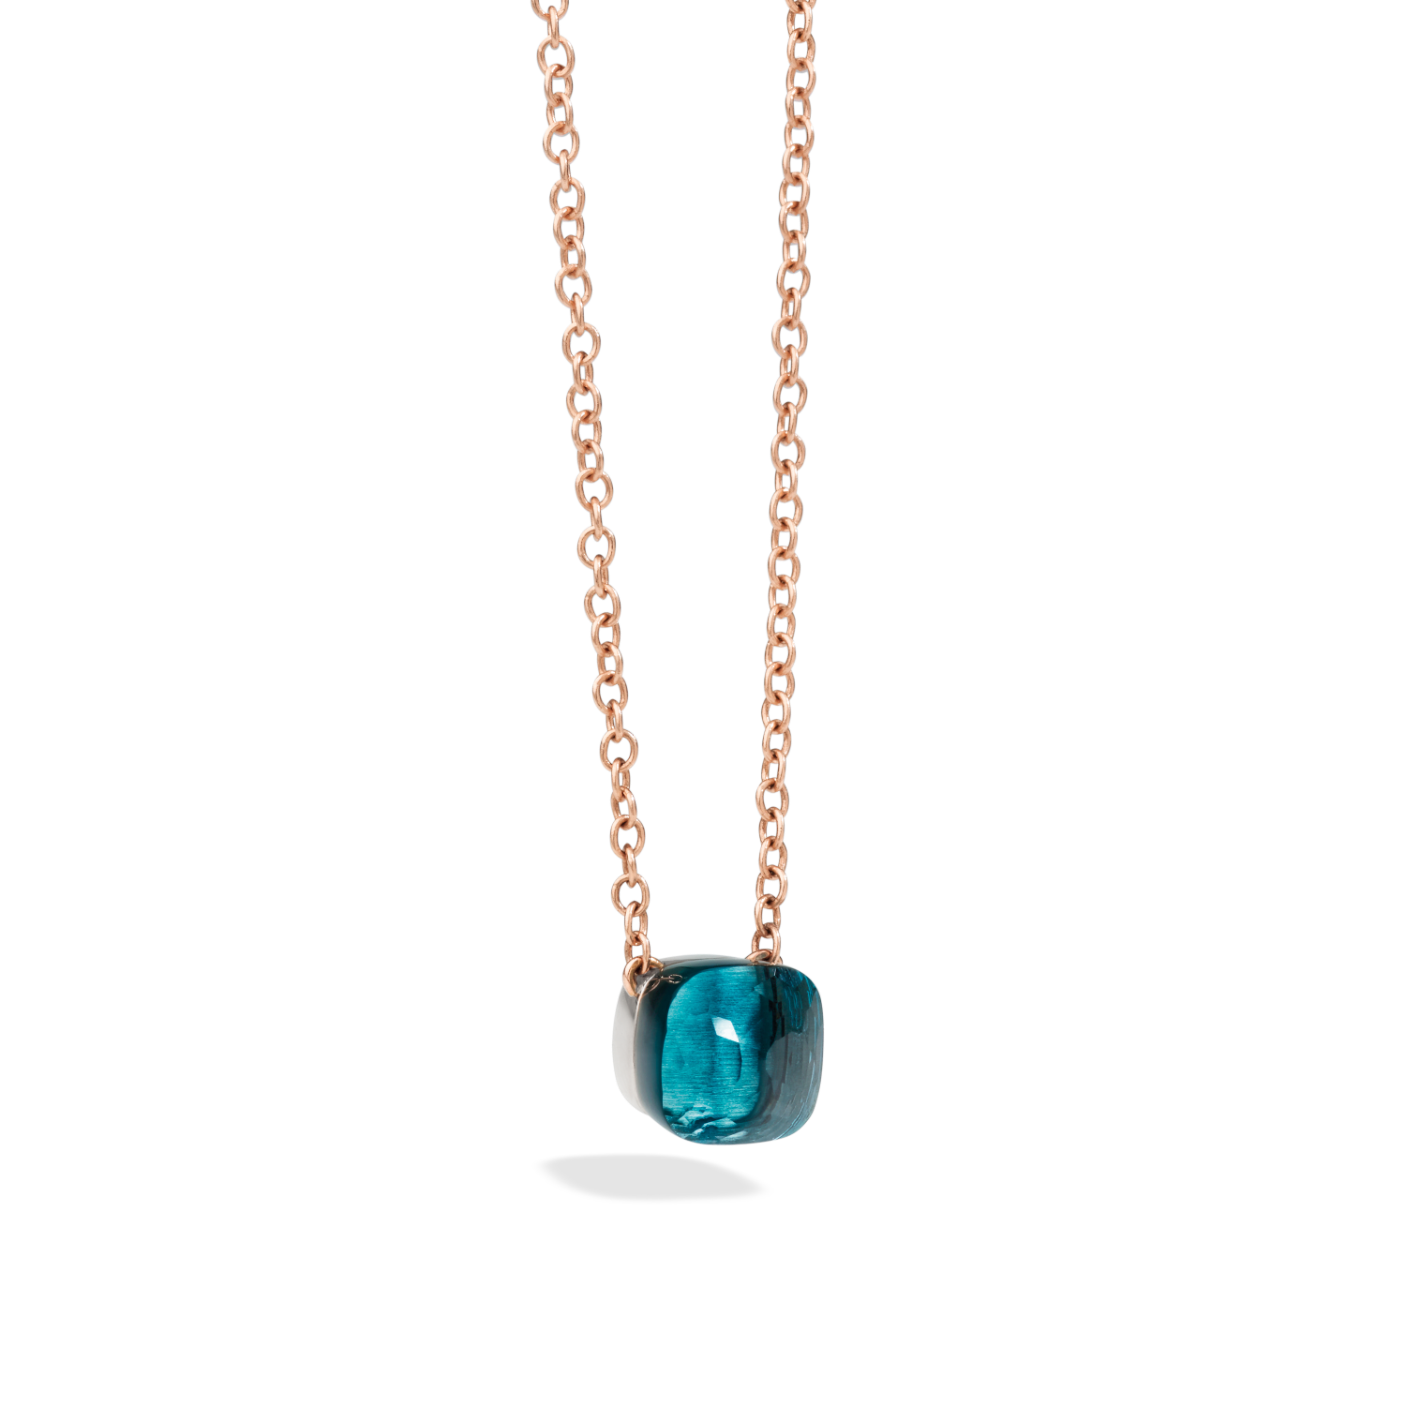 PCB6010_O6000_000TL_010_Pomellato_pendant-with-chain-nudo-rose-gold-18kt-white-gold-18kt-blue-london-topaz.png